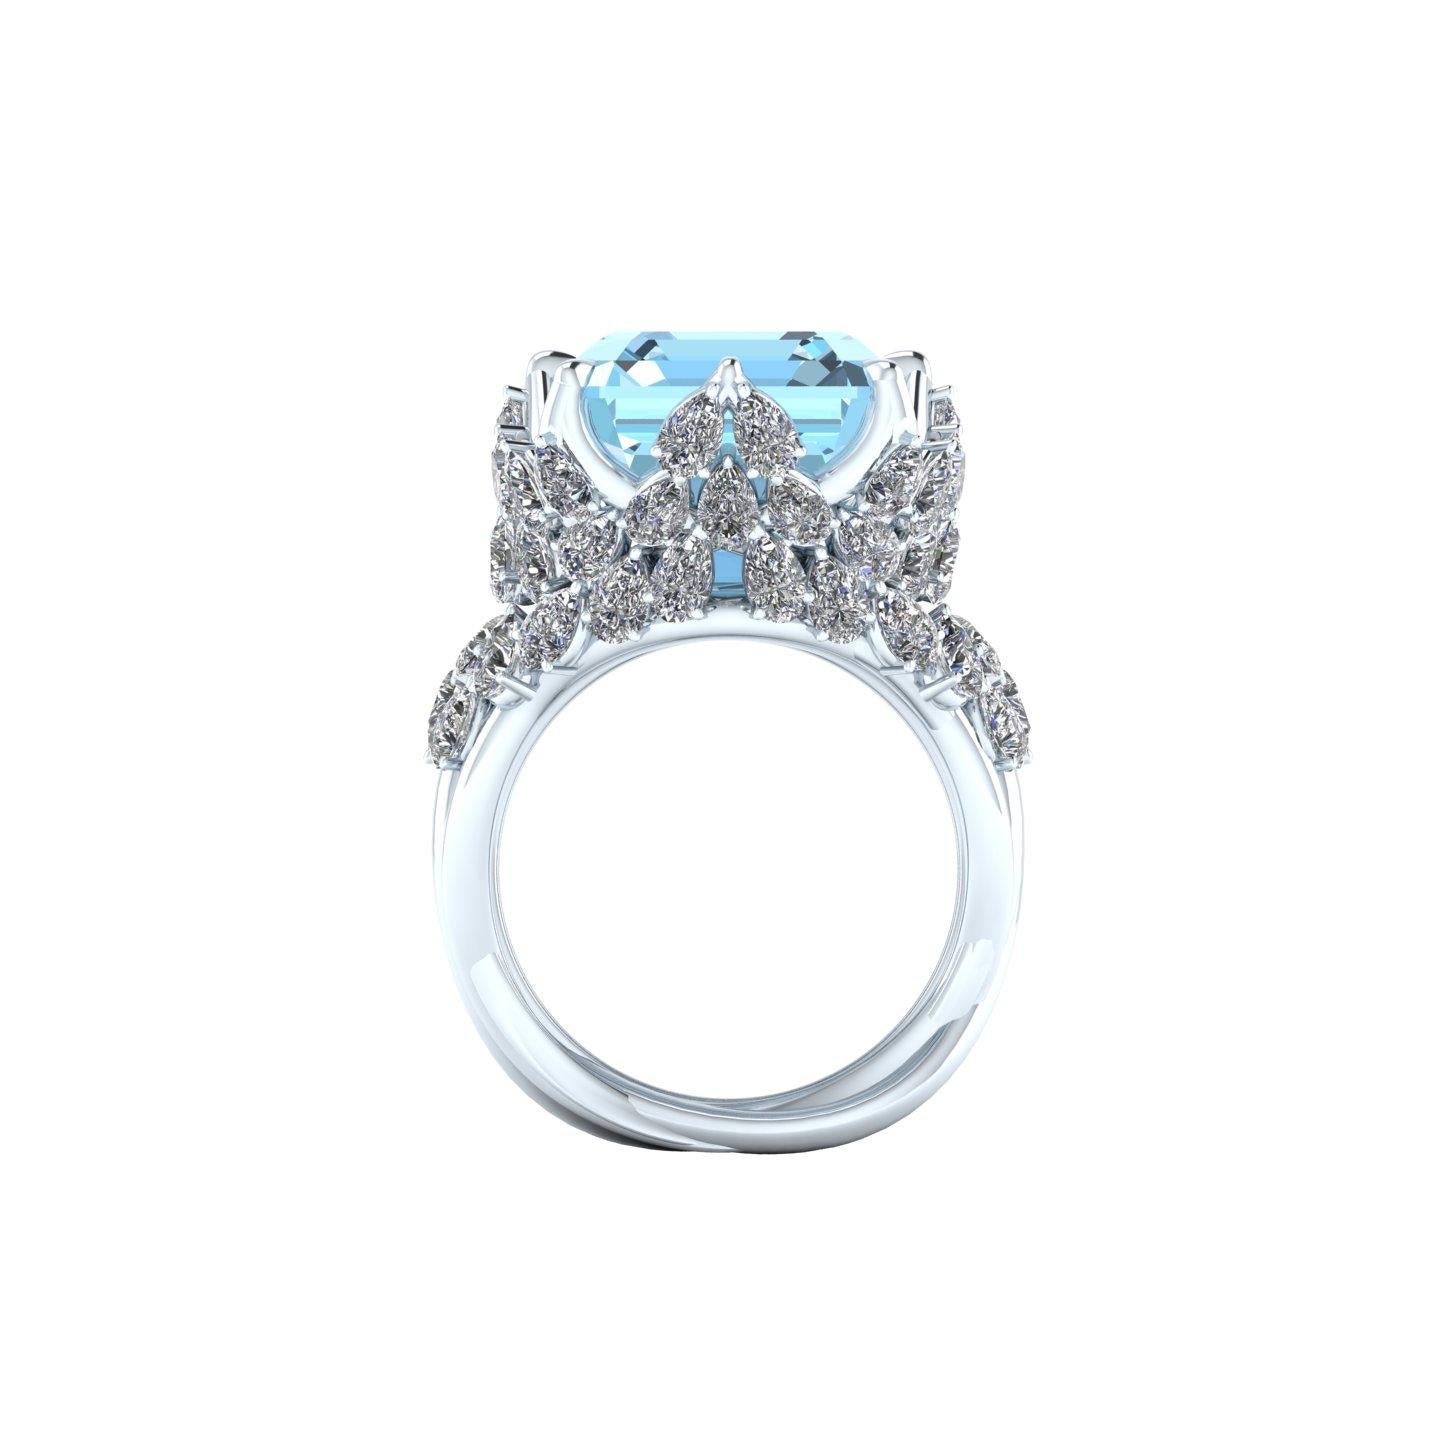 17.40 carat Blue Emerald cut Aquamarine gemstone, of a high quality intense blue, transparent mineral with no inclusions, great cut's quality adorned by approximately 4.7 carats of bright F/G color, VS clarity Pear shape diamonds.
The ring is